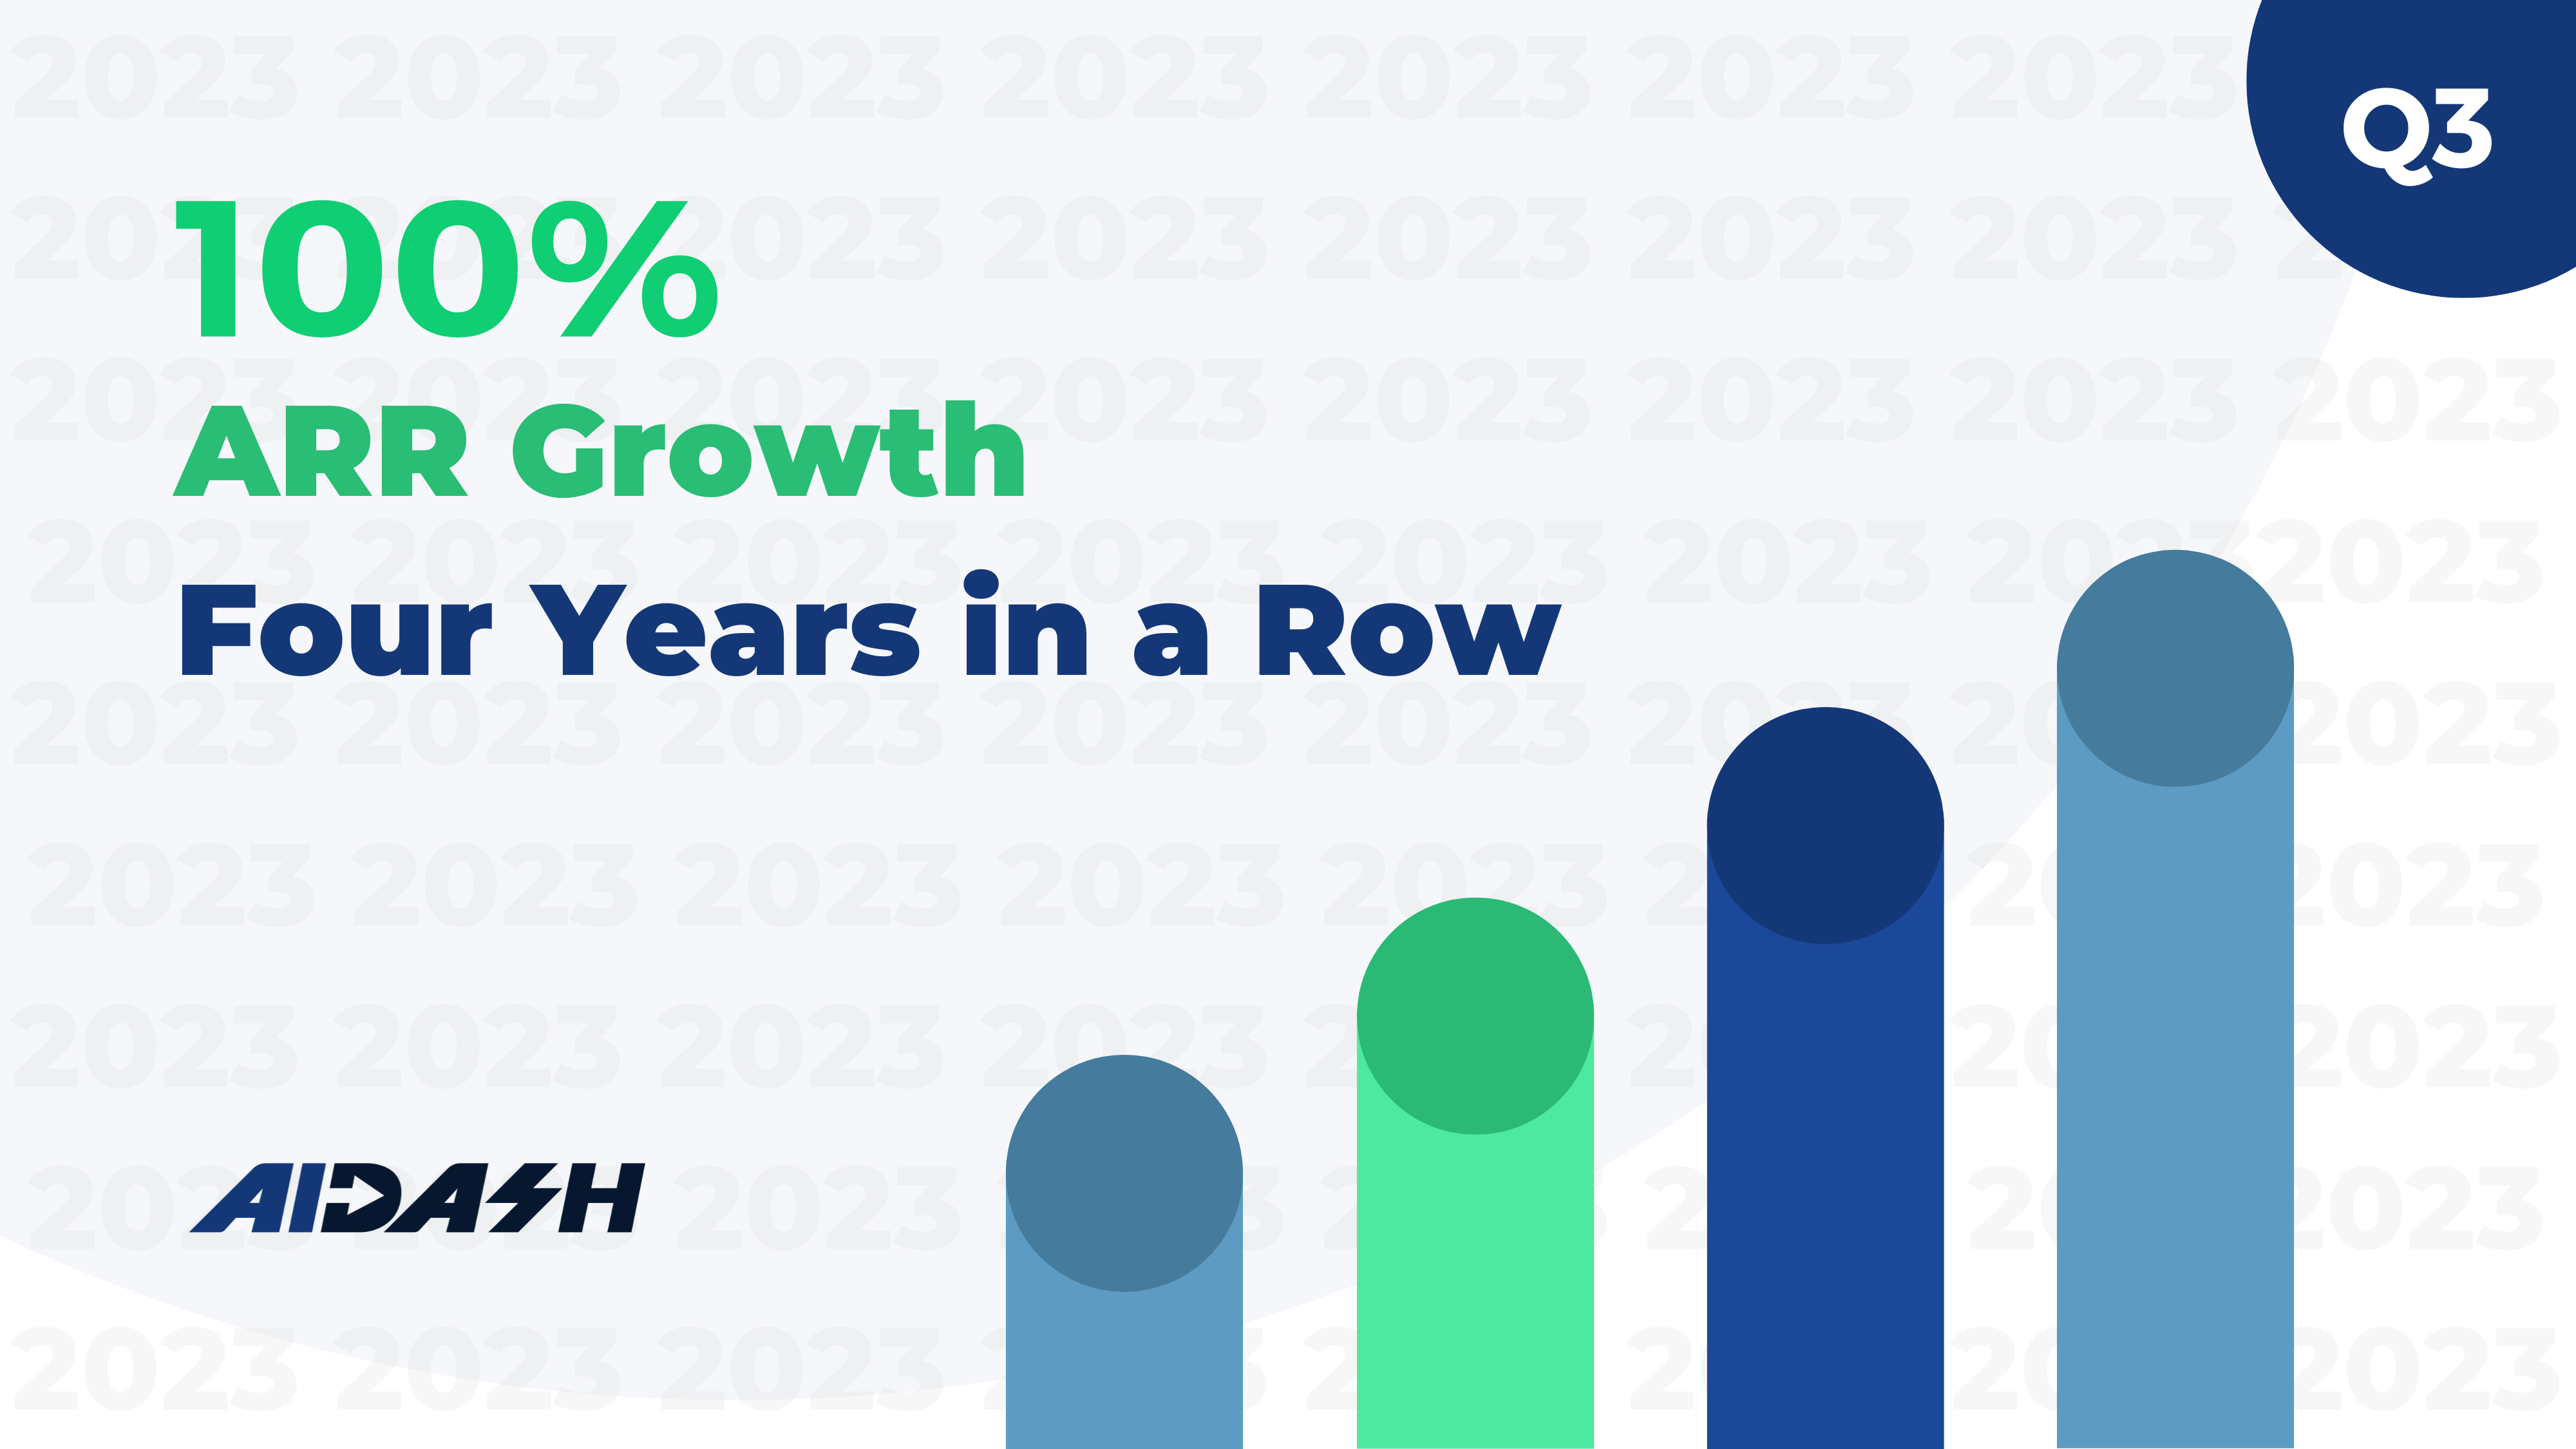 AiDash reports strongest Q3 ever as climate tech company maintains 100% annual growth rate for fourth year running